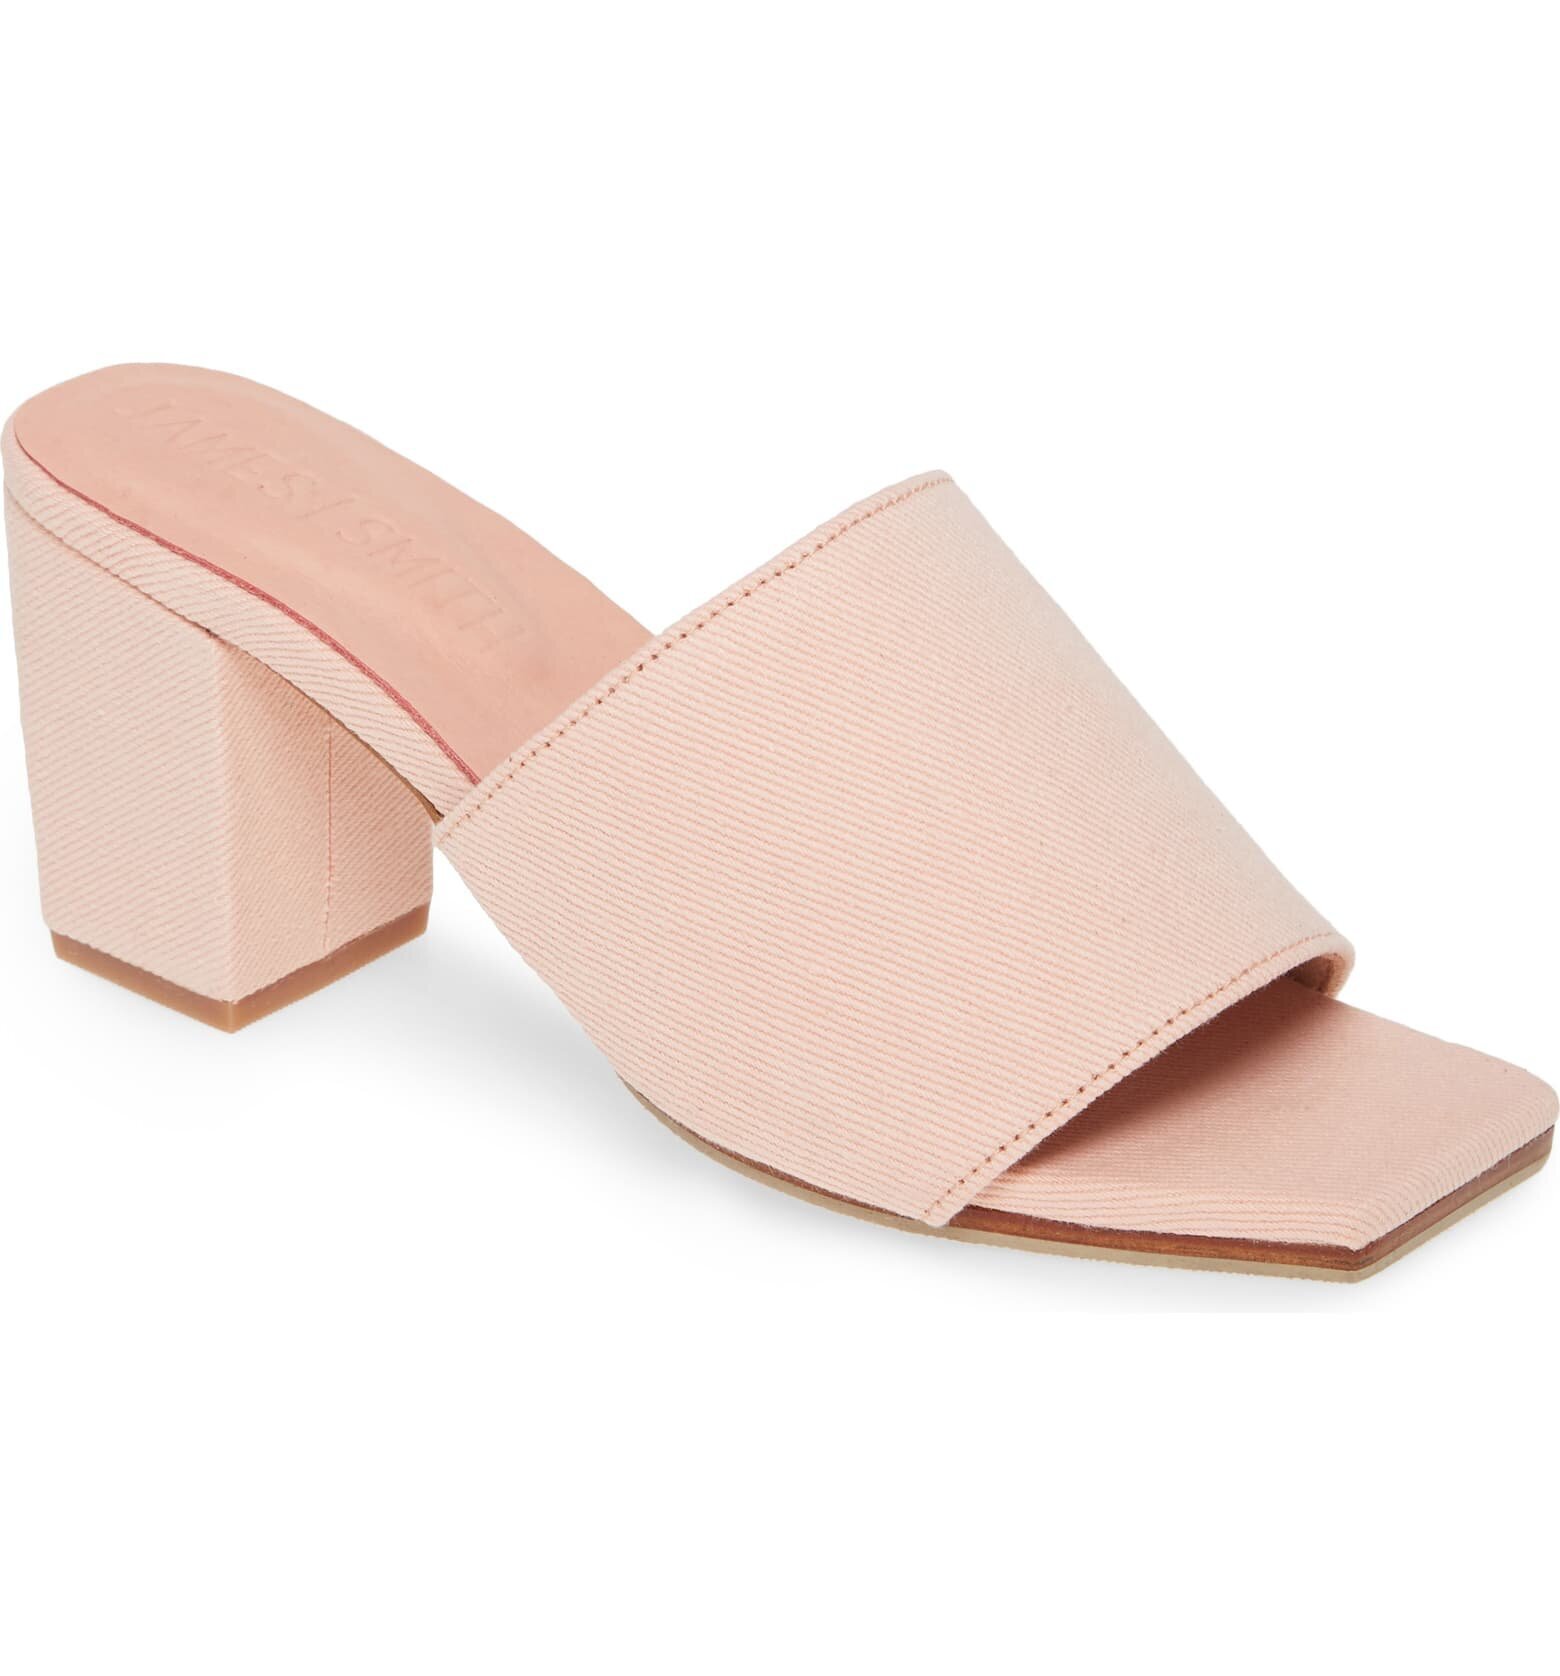 nordstrom slides and mules